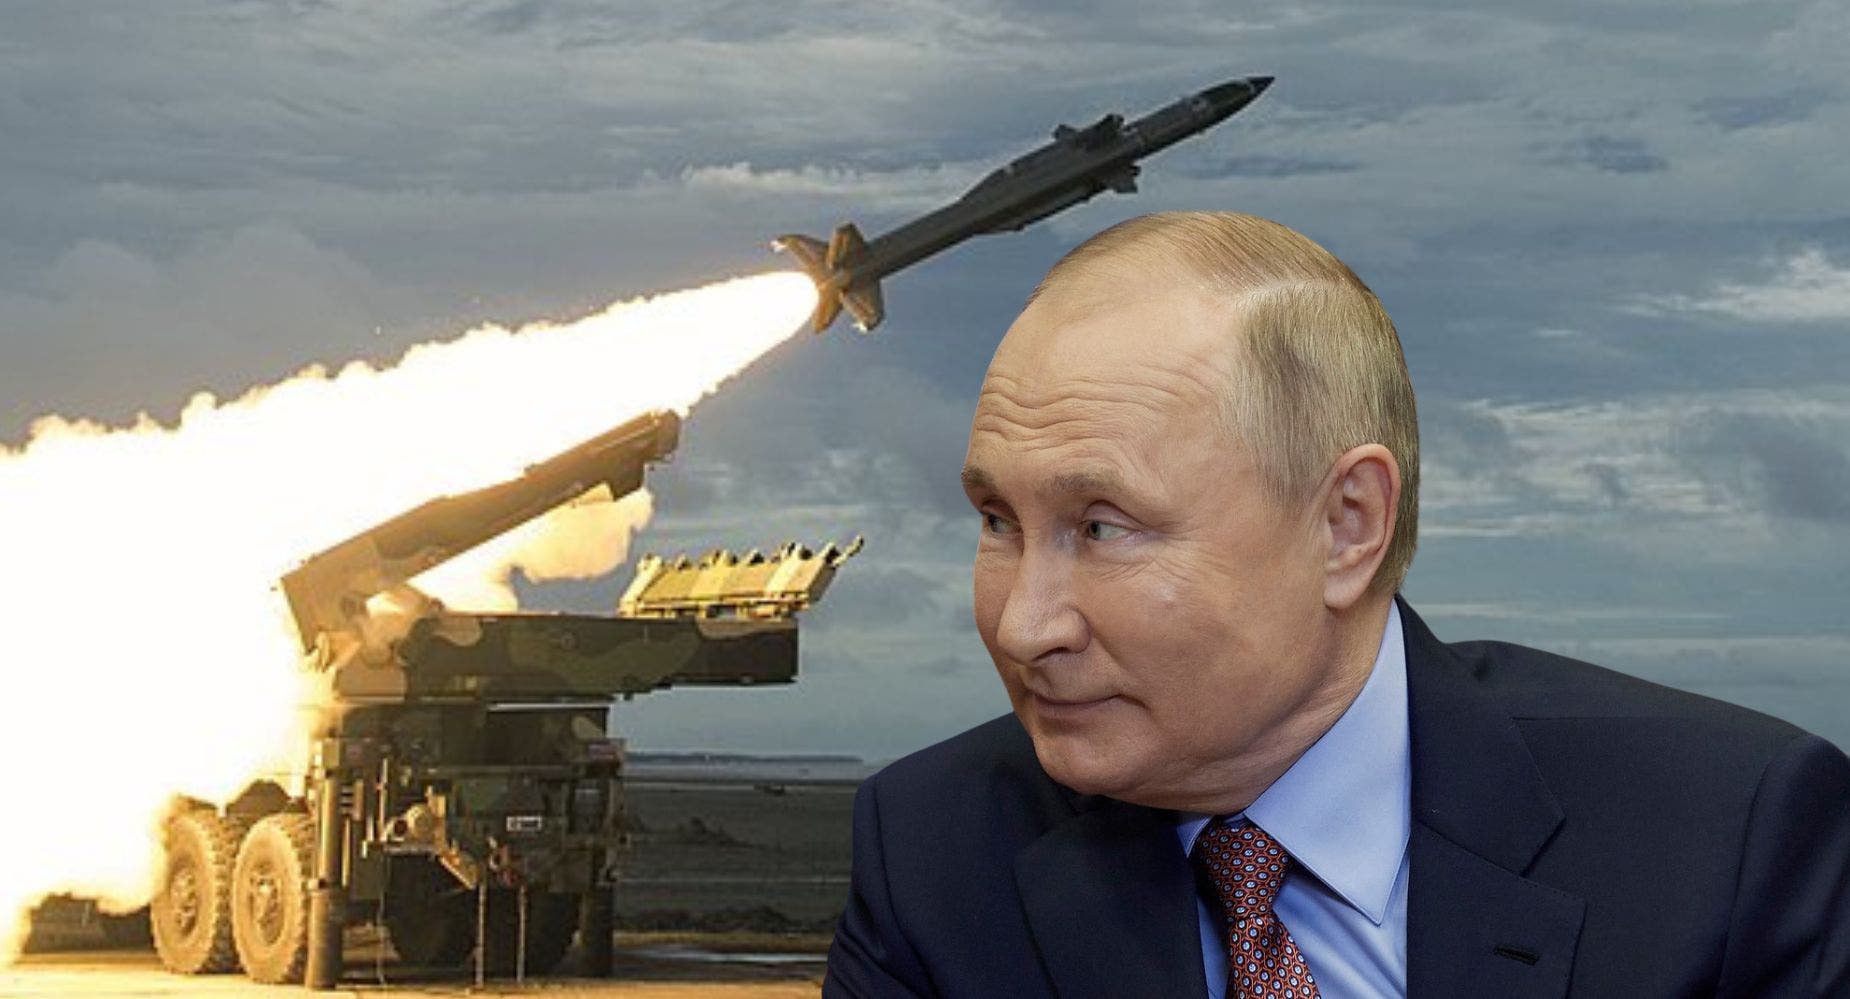 Putin Isn't Bluffing About Using Nukes, Says European Union: 'Russian Army Has Been Pushed Into A Corner'